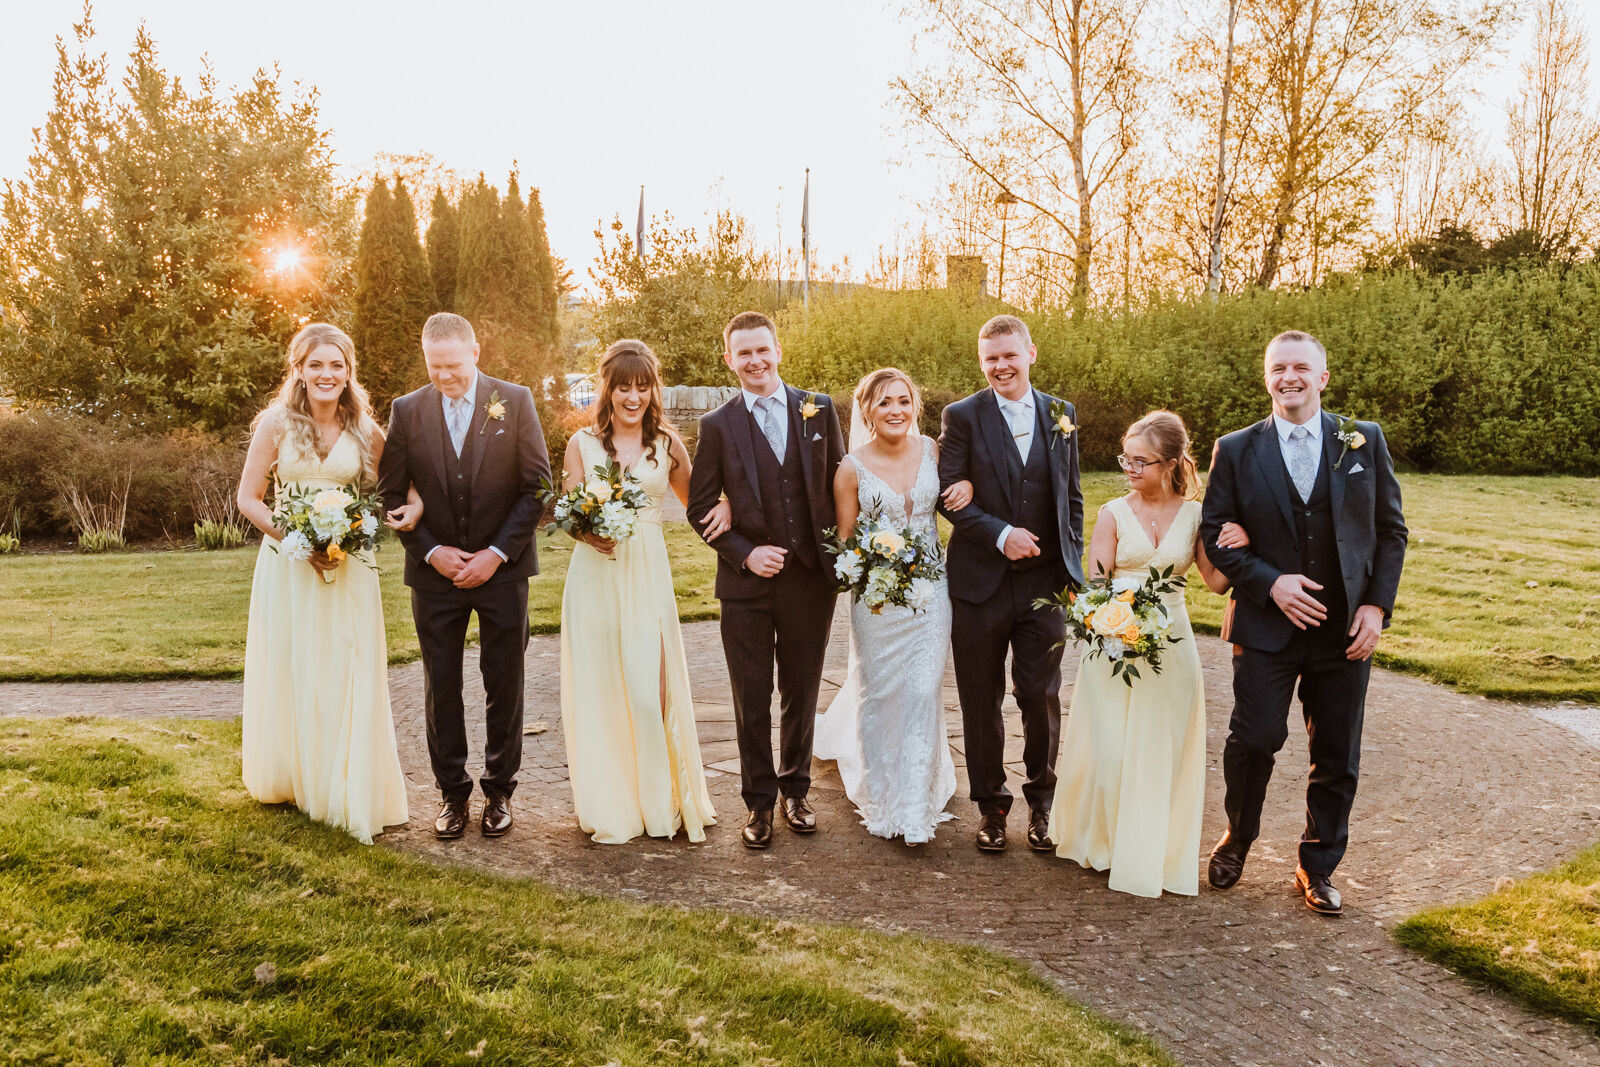 Bridal party walking in sunset